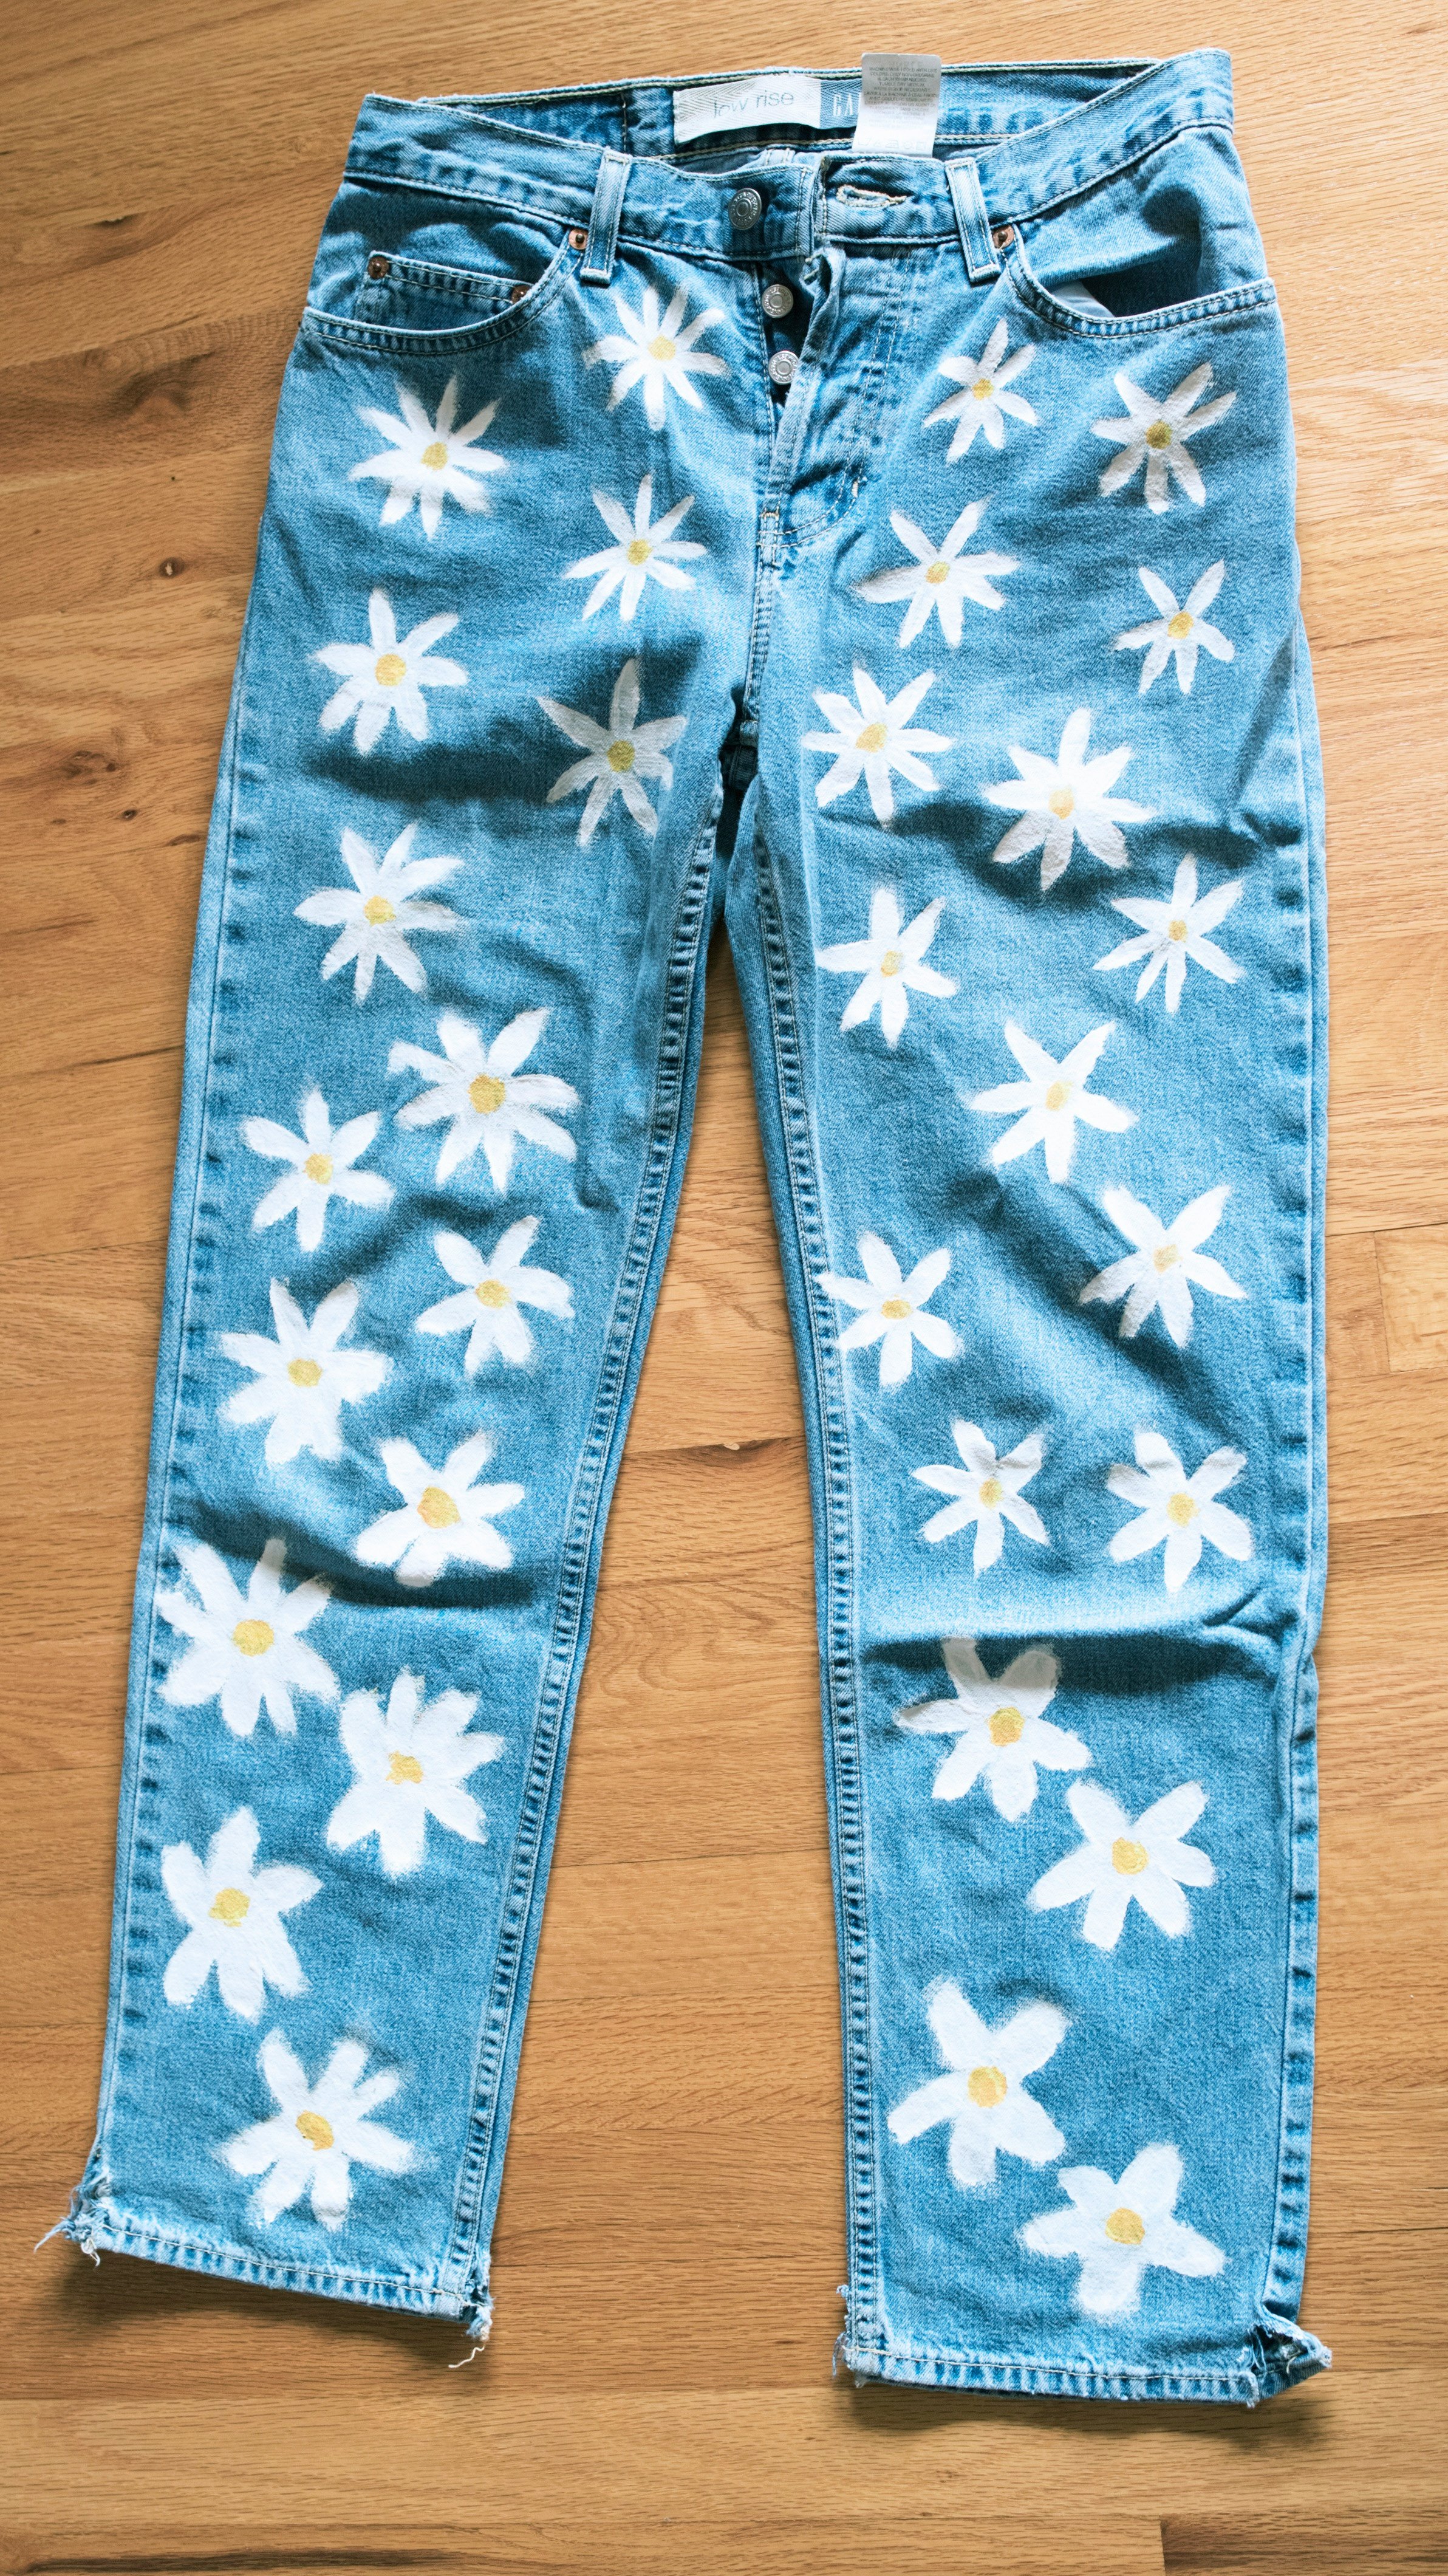 flowers painted on jeans